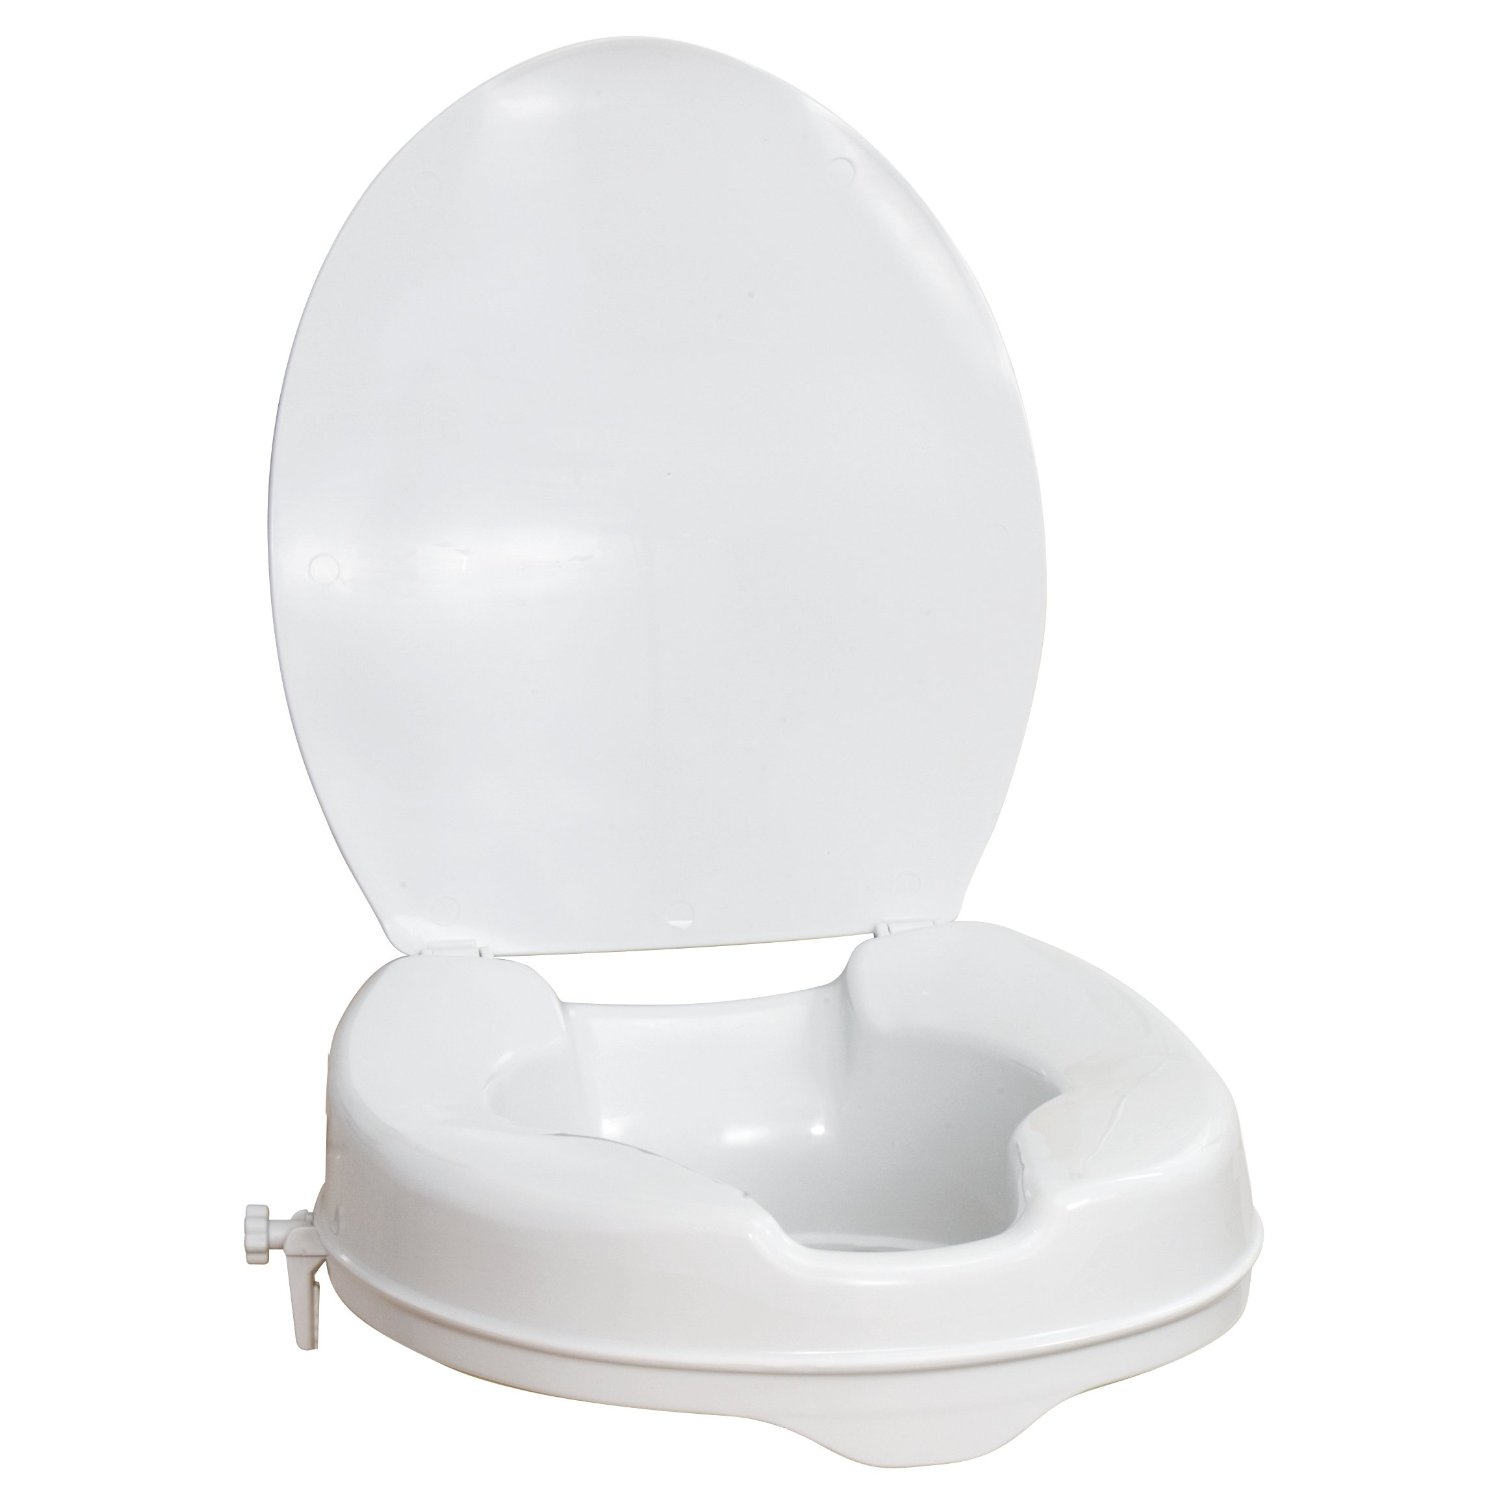 Raised elevated toilet seat with Lid